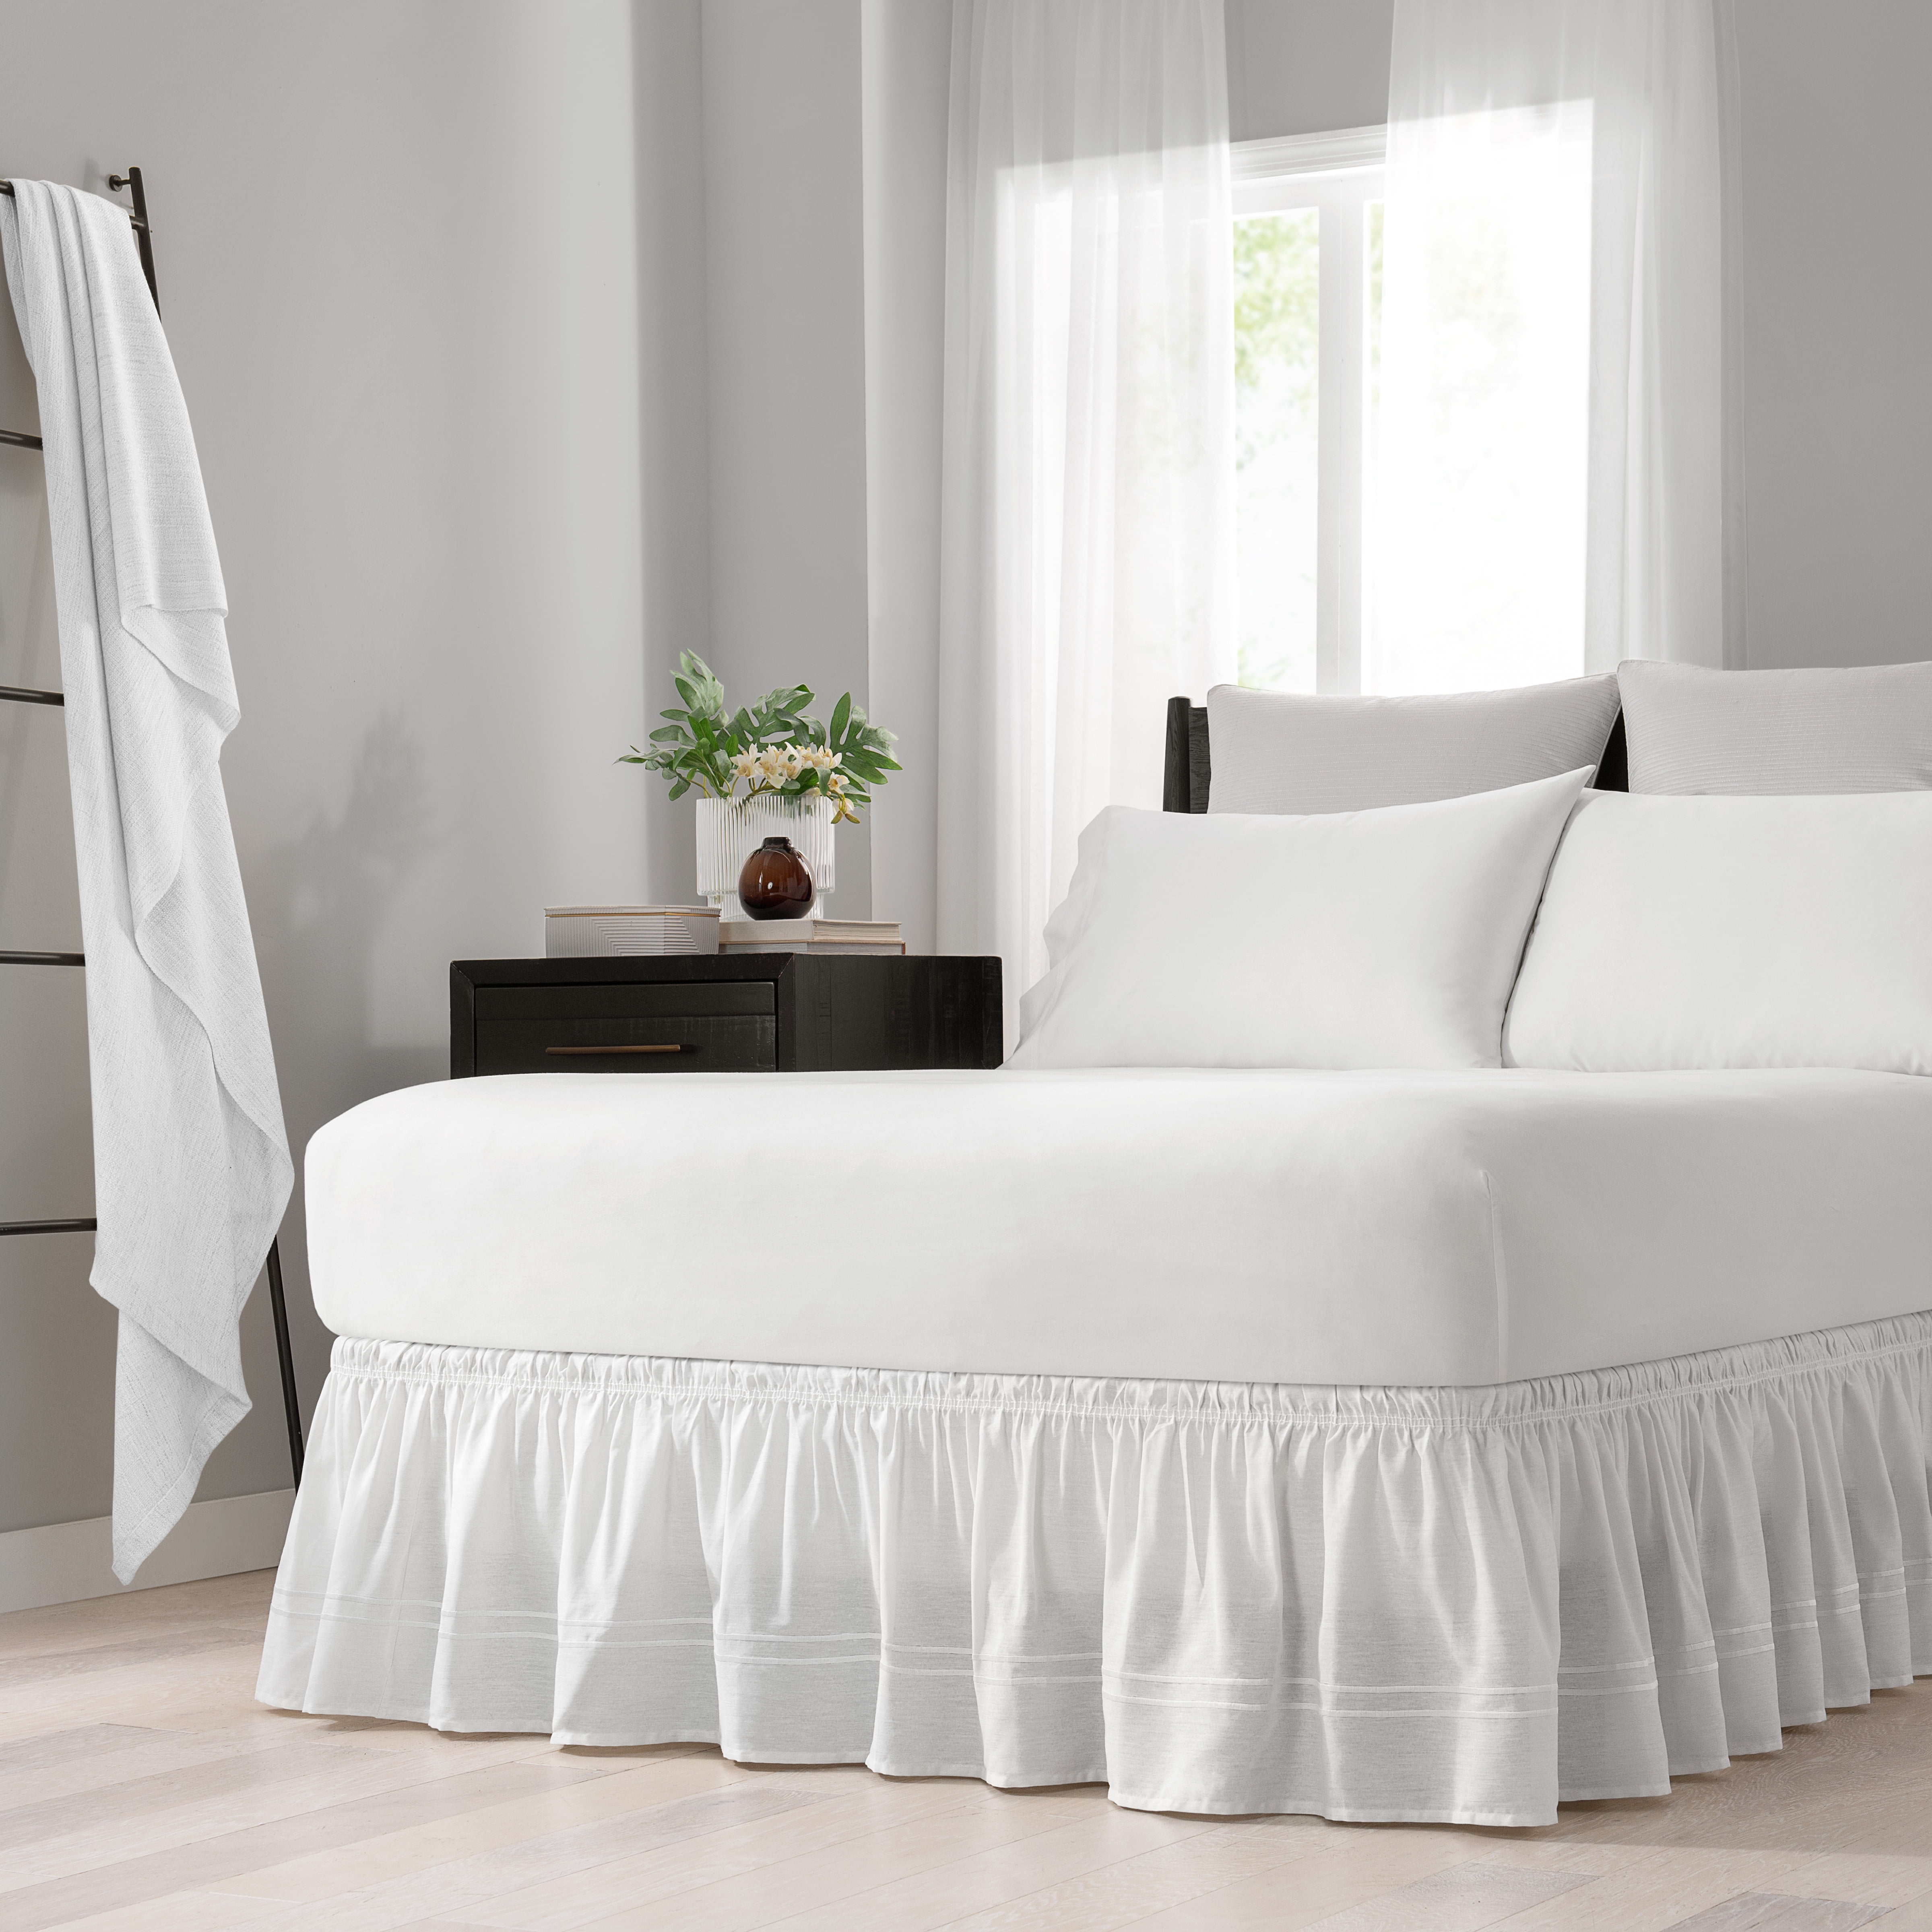 Details about   U PICK Bed SKIRT King Size Blue or White 140 TC Ruffle MAINSTAYS Home Decor NEW 